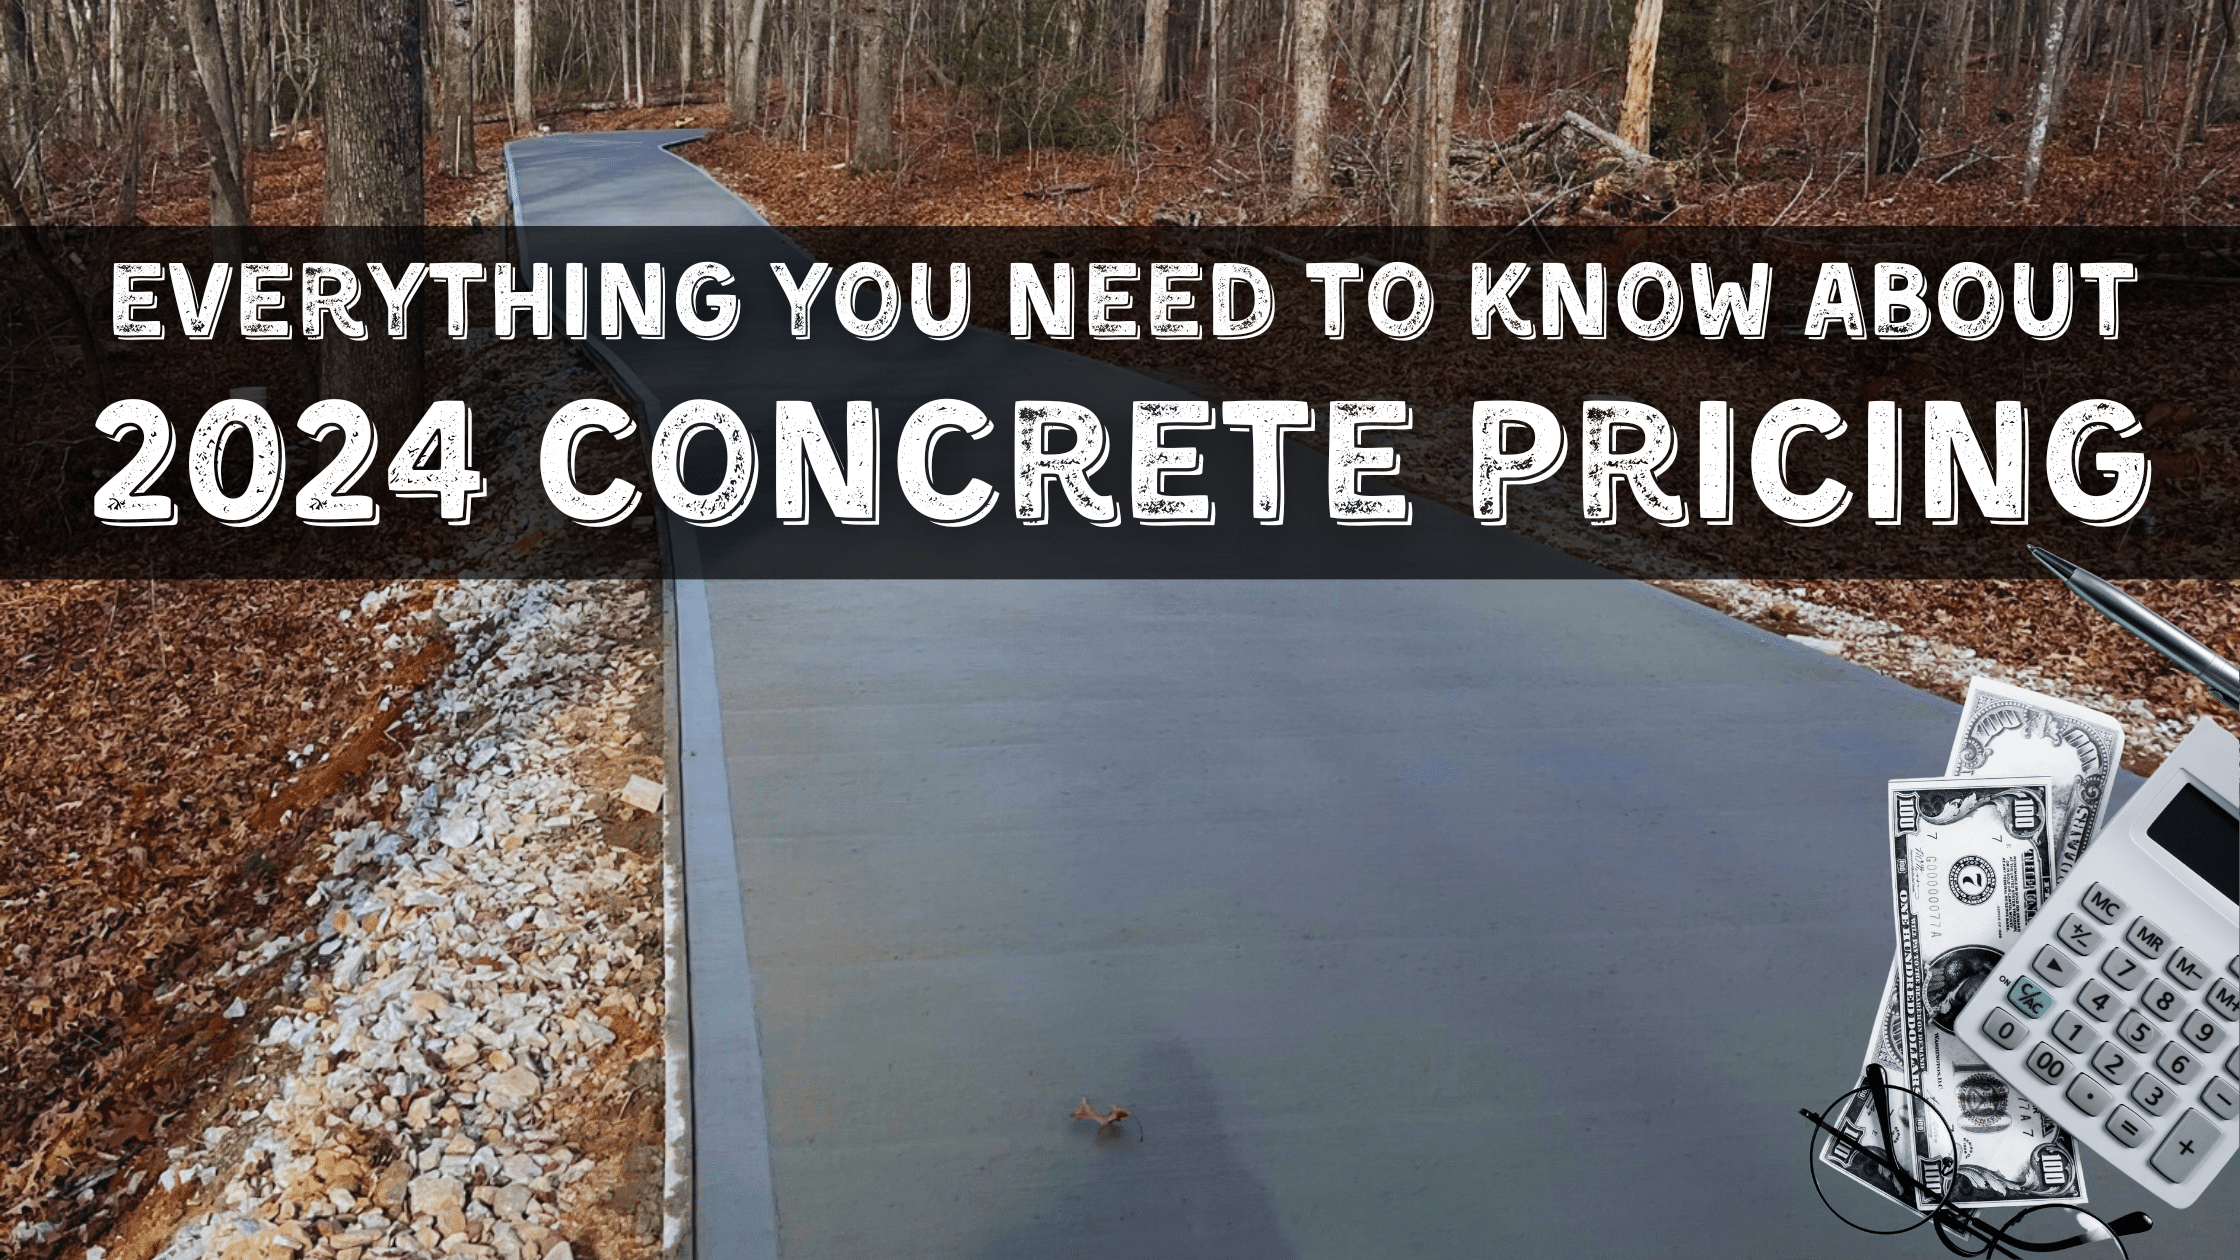 everything you need to know about 2024 Concrete Pricing